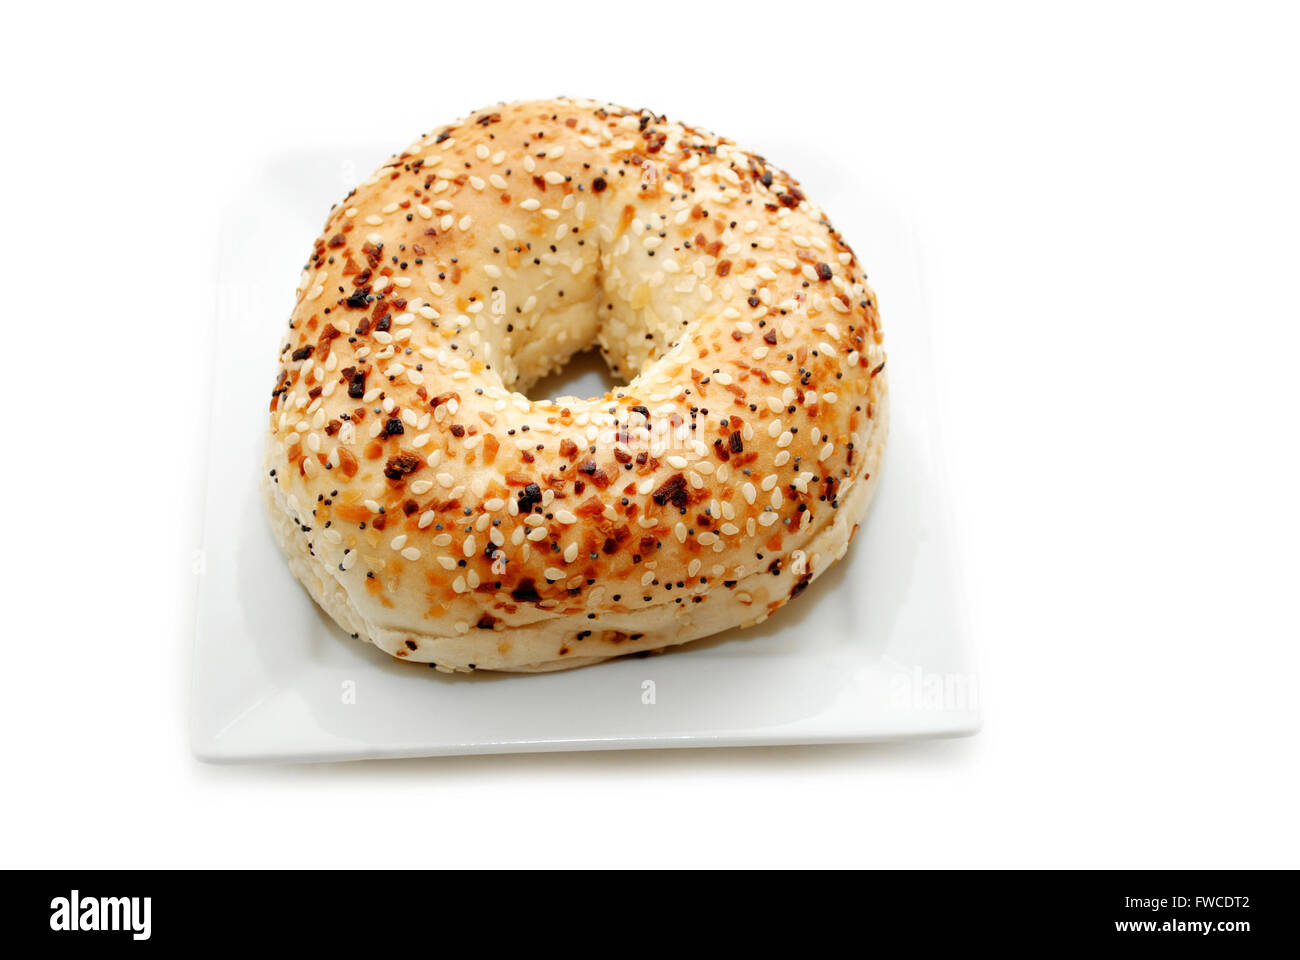 A Whole Multigrain Bagel Covered with Various Toppings Stock Photo